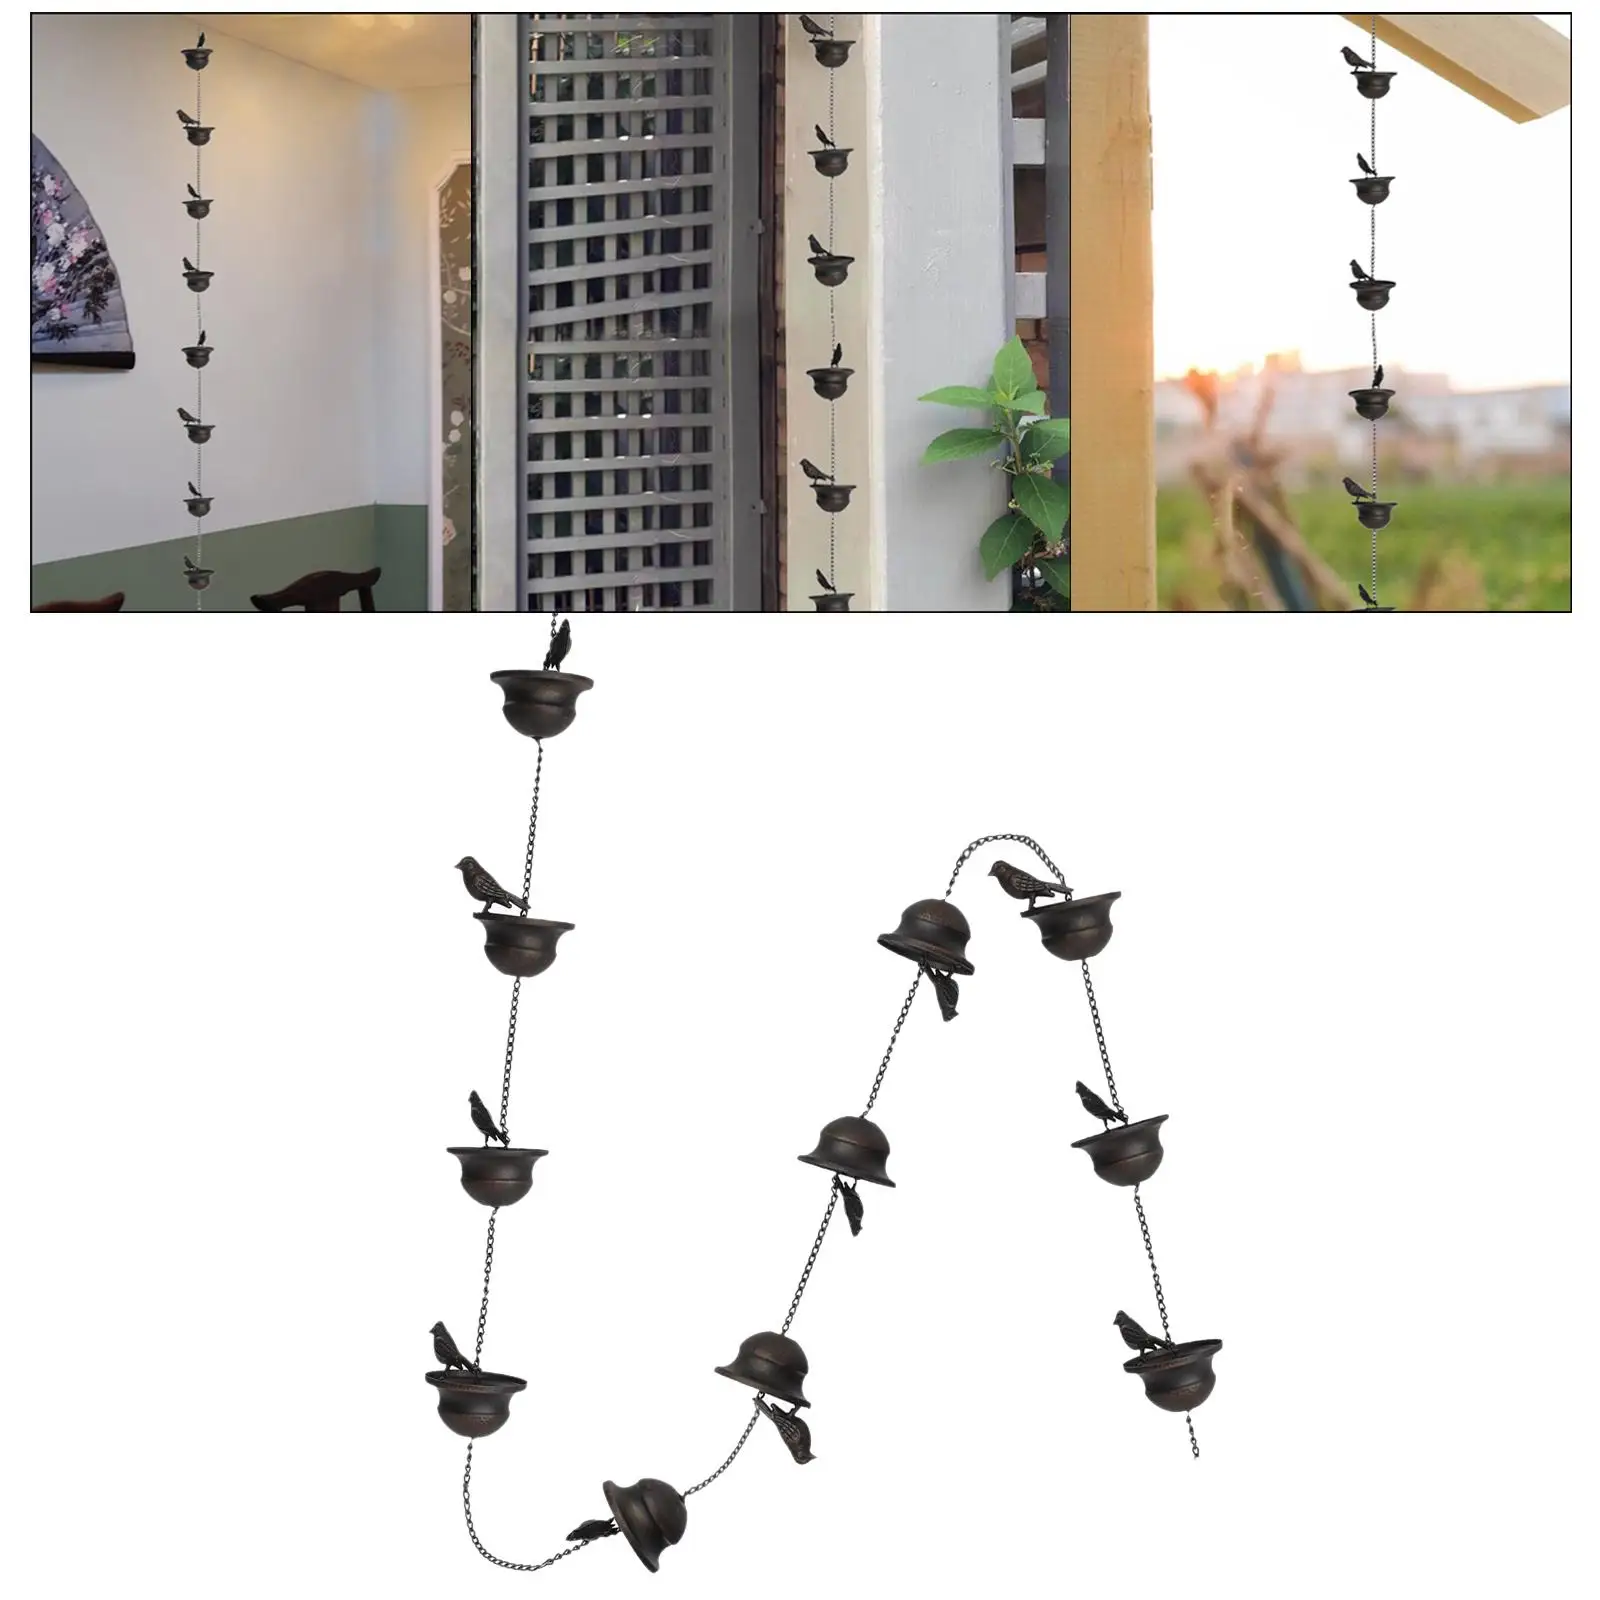 Bird Rain Chains for Gutters Replacement Downspouts Bird Bath 240cm Rainwater Catcher Chains for Roofs Yard Display Outdoor Home